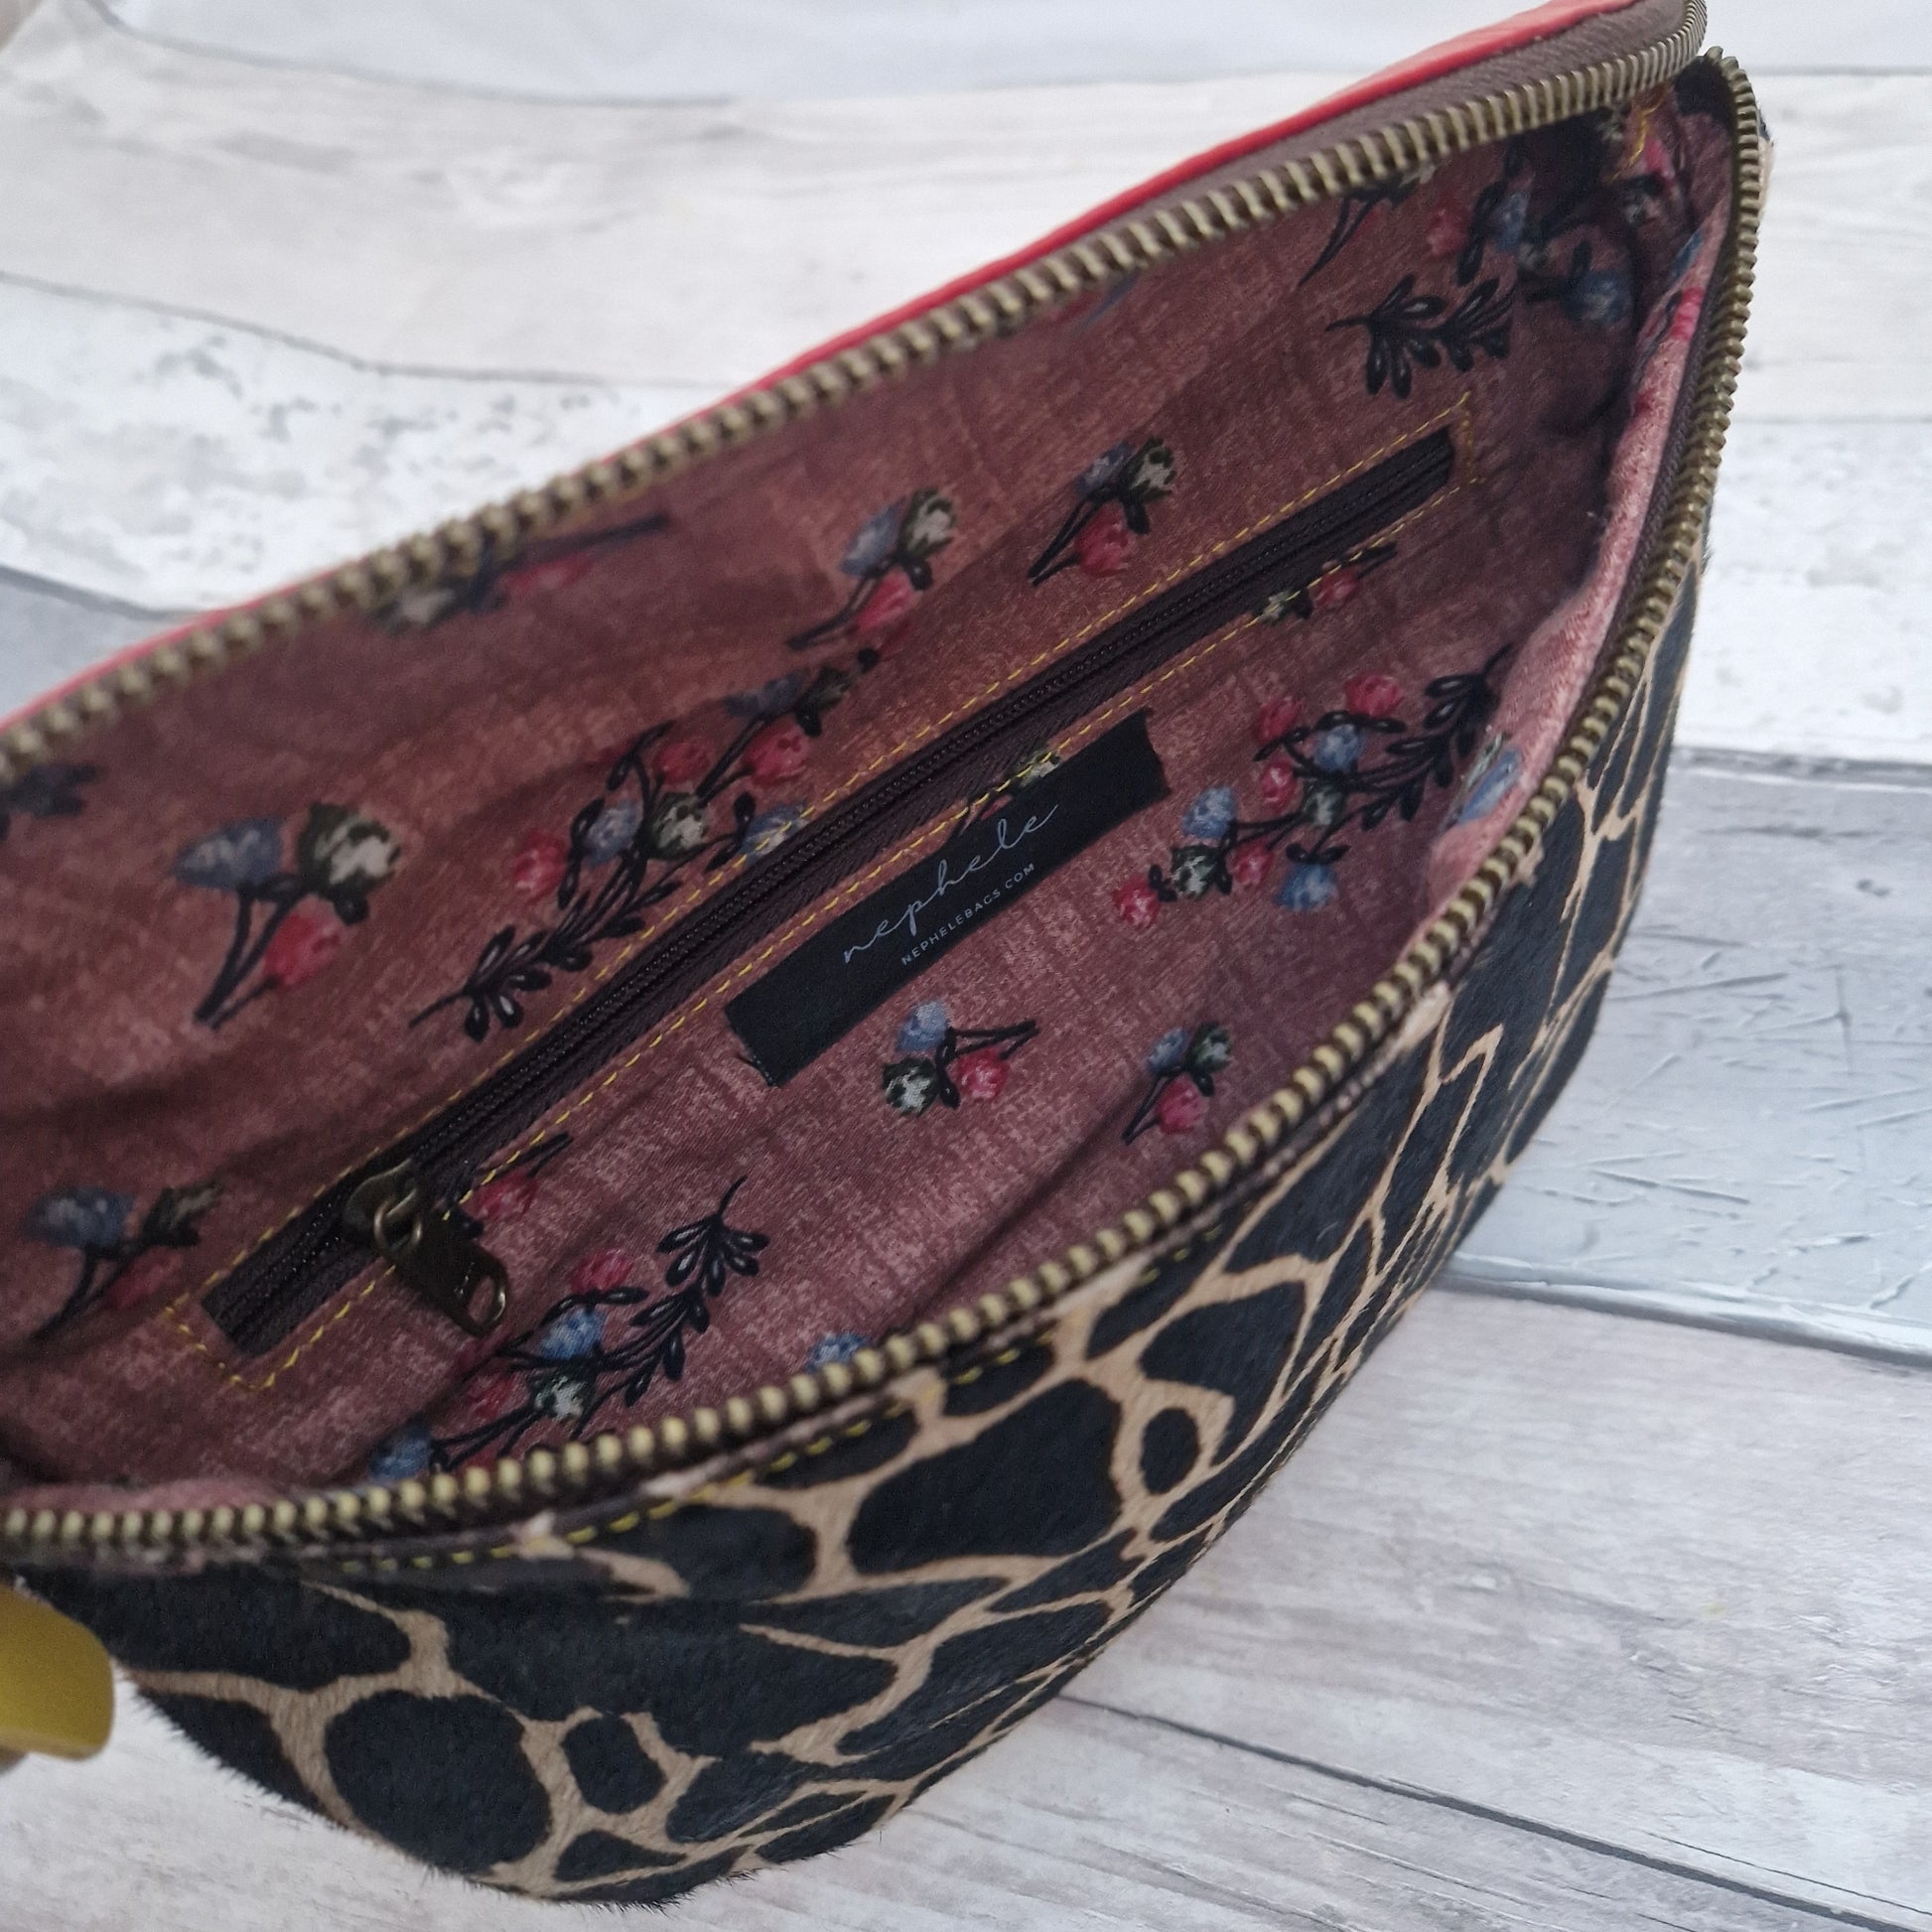 Leather bumbag style bag with a textured front panel in a giraffe print.